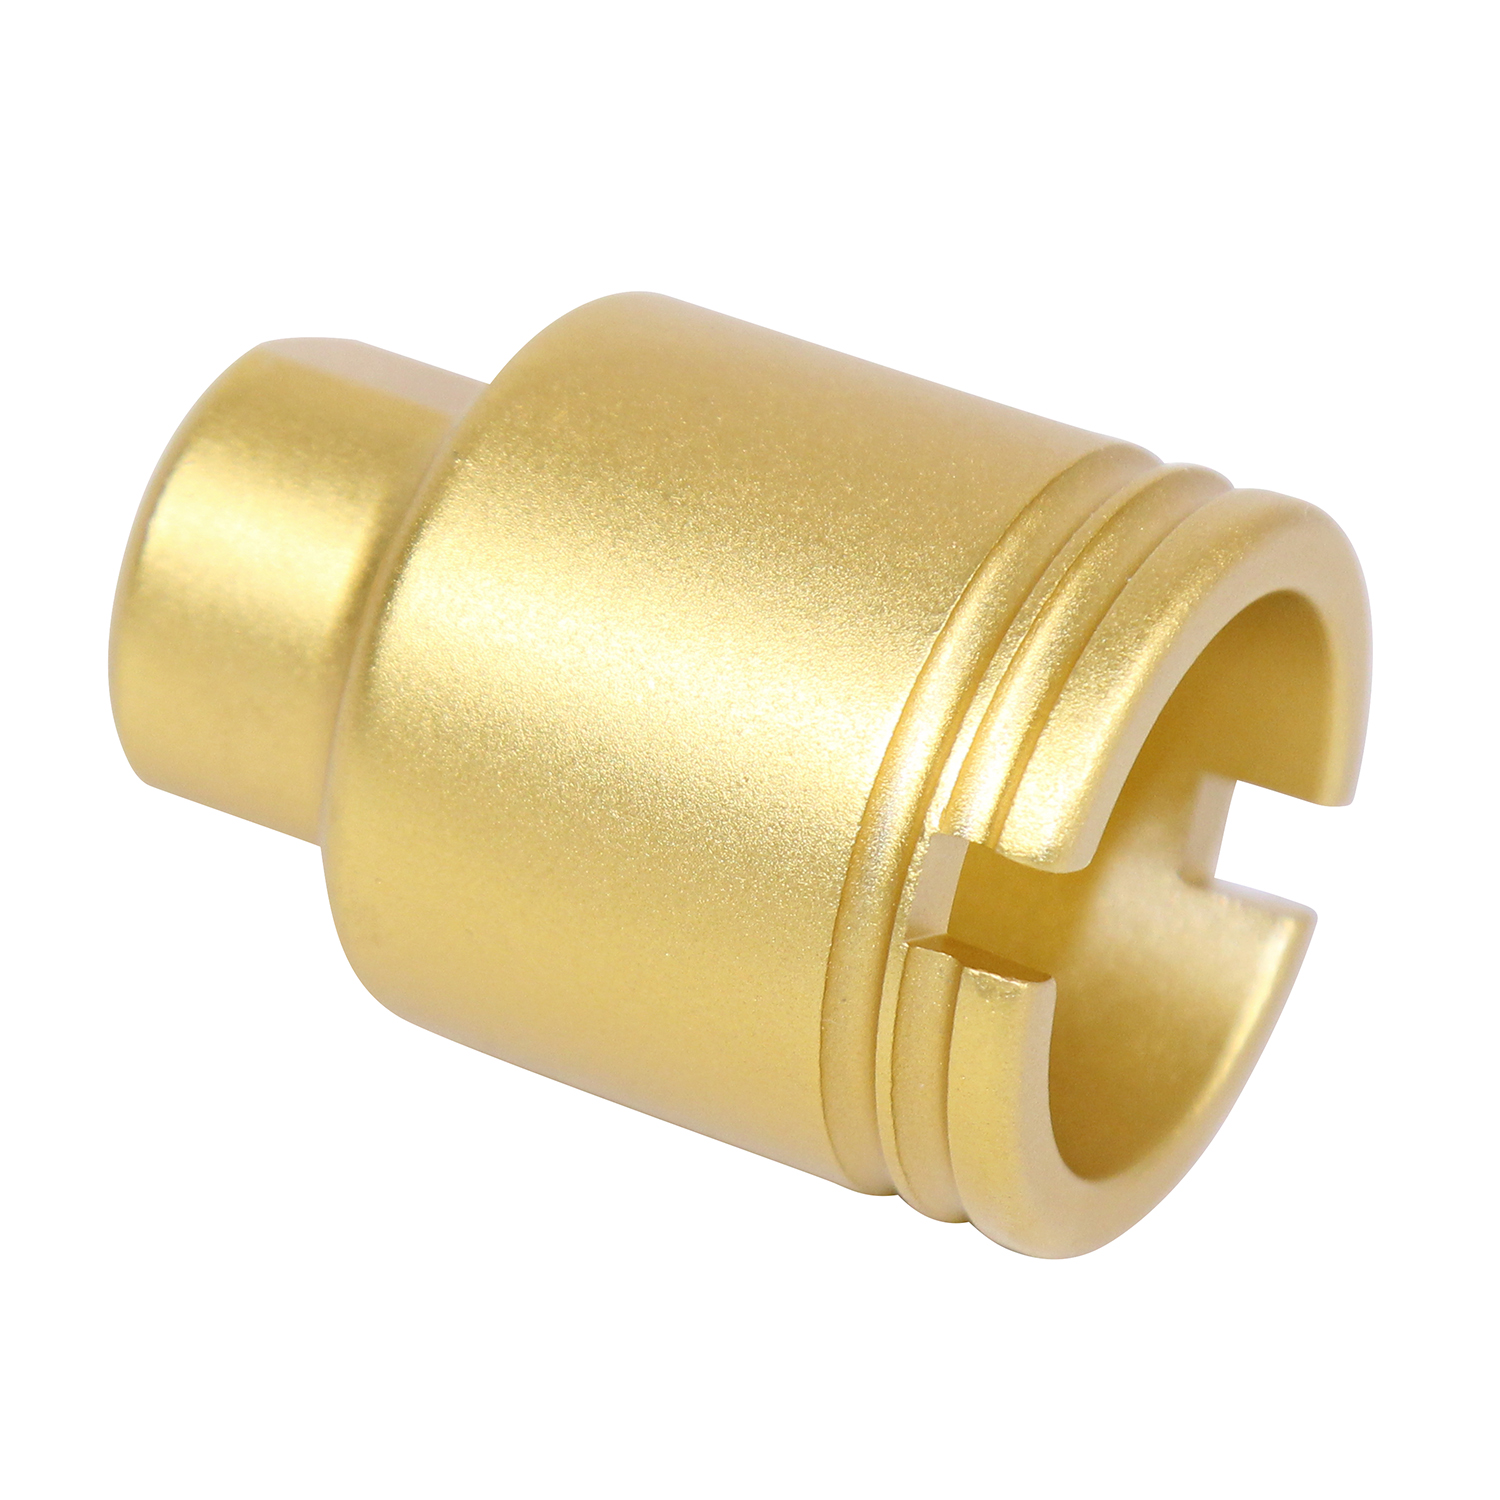 AR 9mm Stubby Slim Compact Flash Can (Anodized Gold)